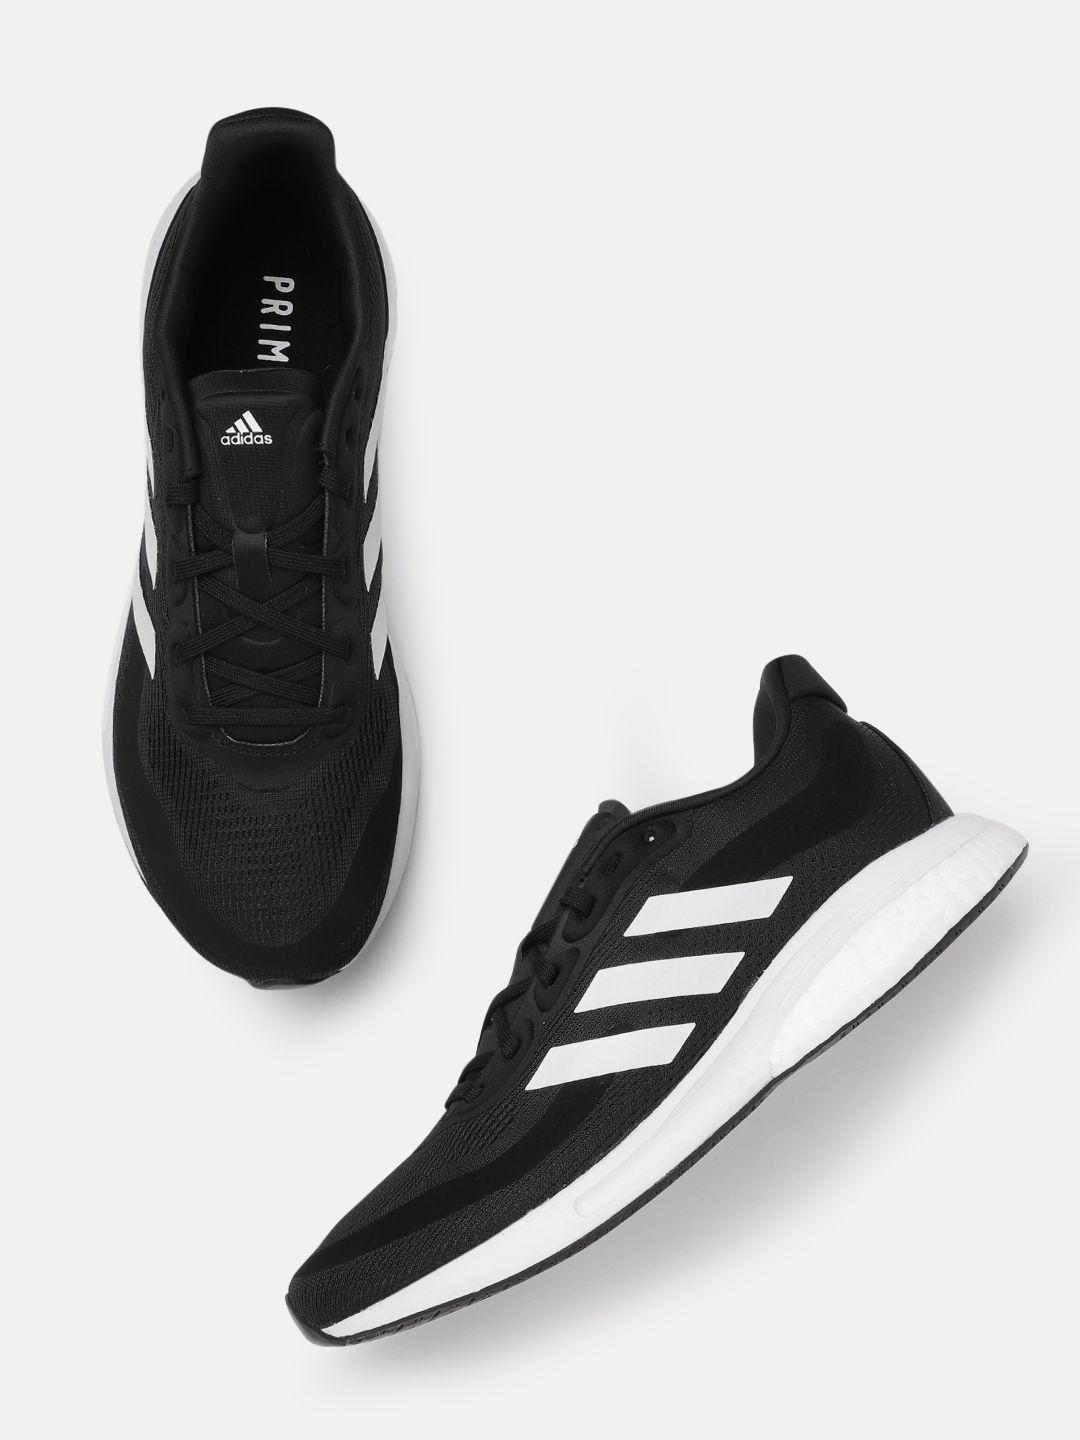 ADIDAS Women Black Woven Design Supernova Sustainable Running Shoes Price in India